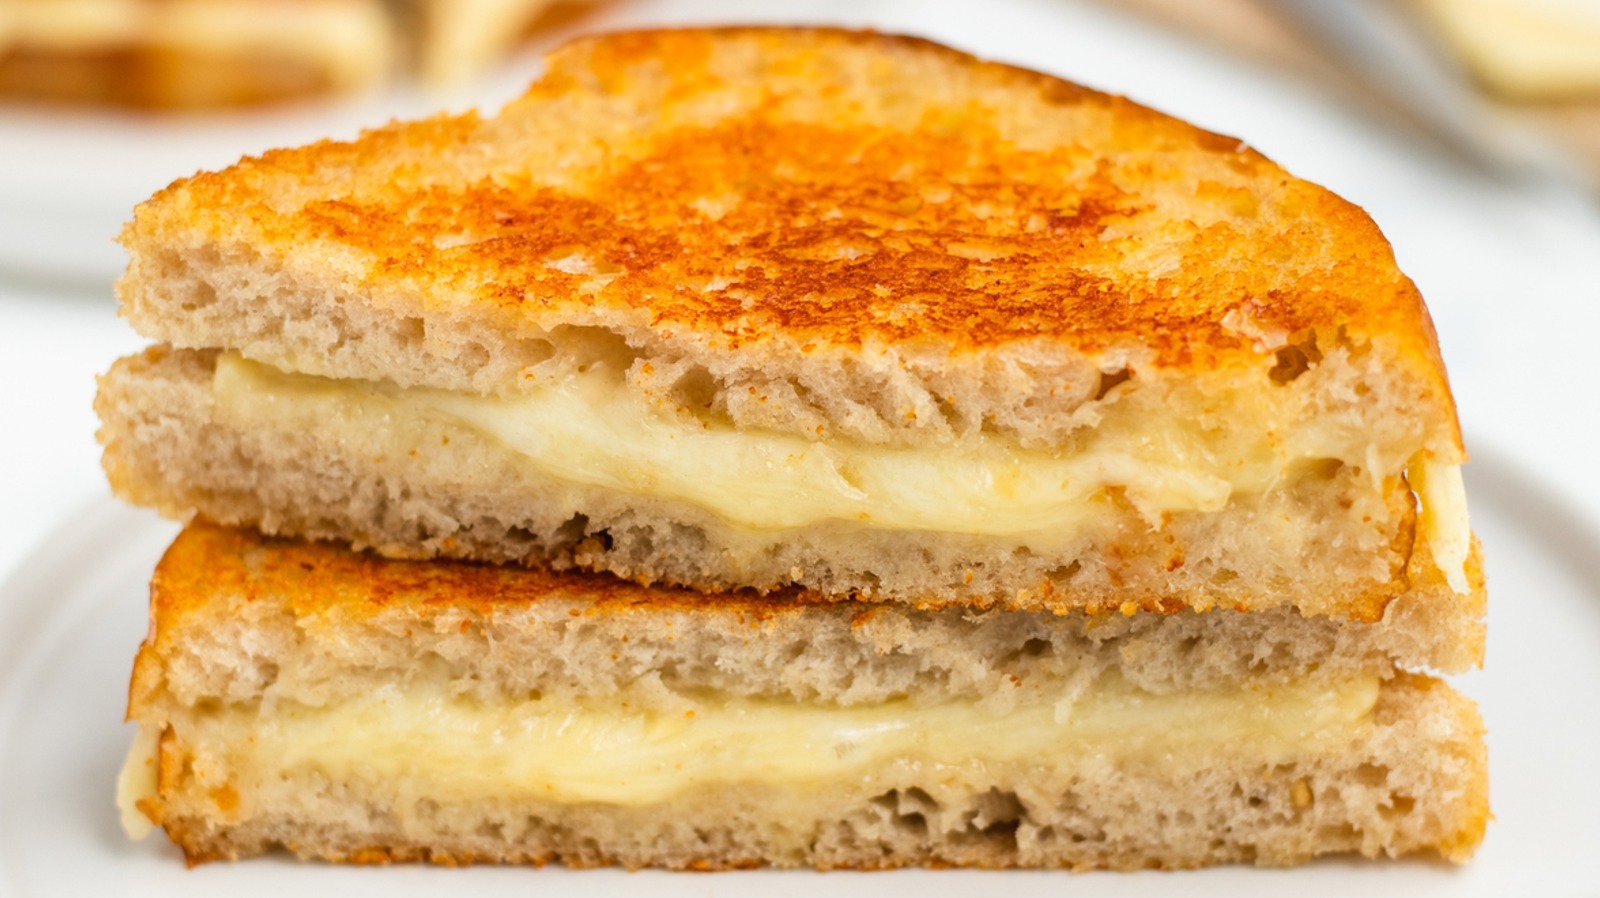 https://www.mashed.com/img/gallery/copycat-starbucks-grilled-cheese-recipe/l-intro-1687772110.jpg